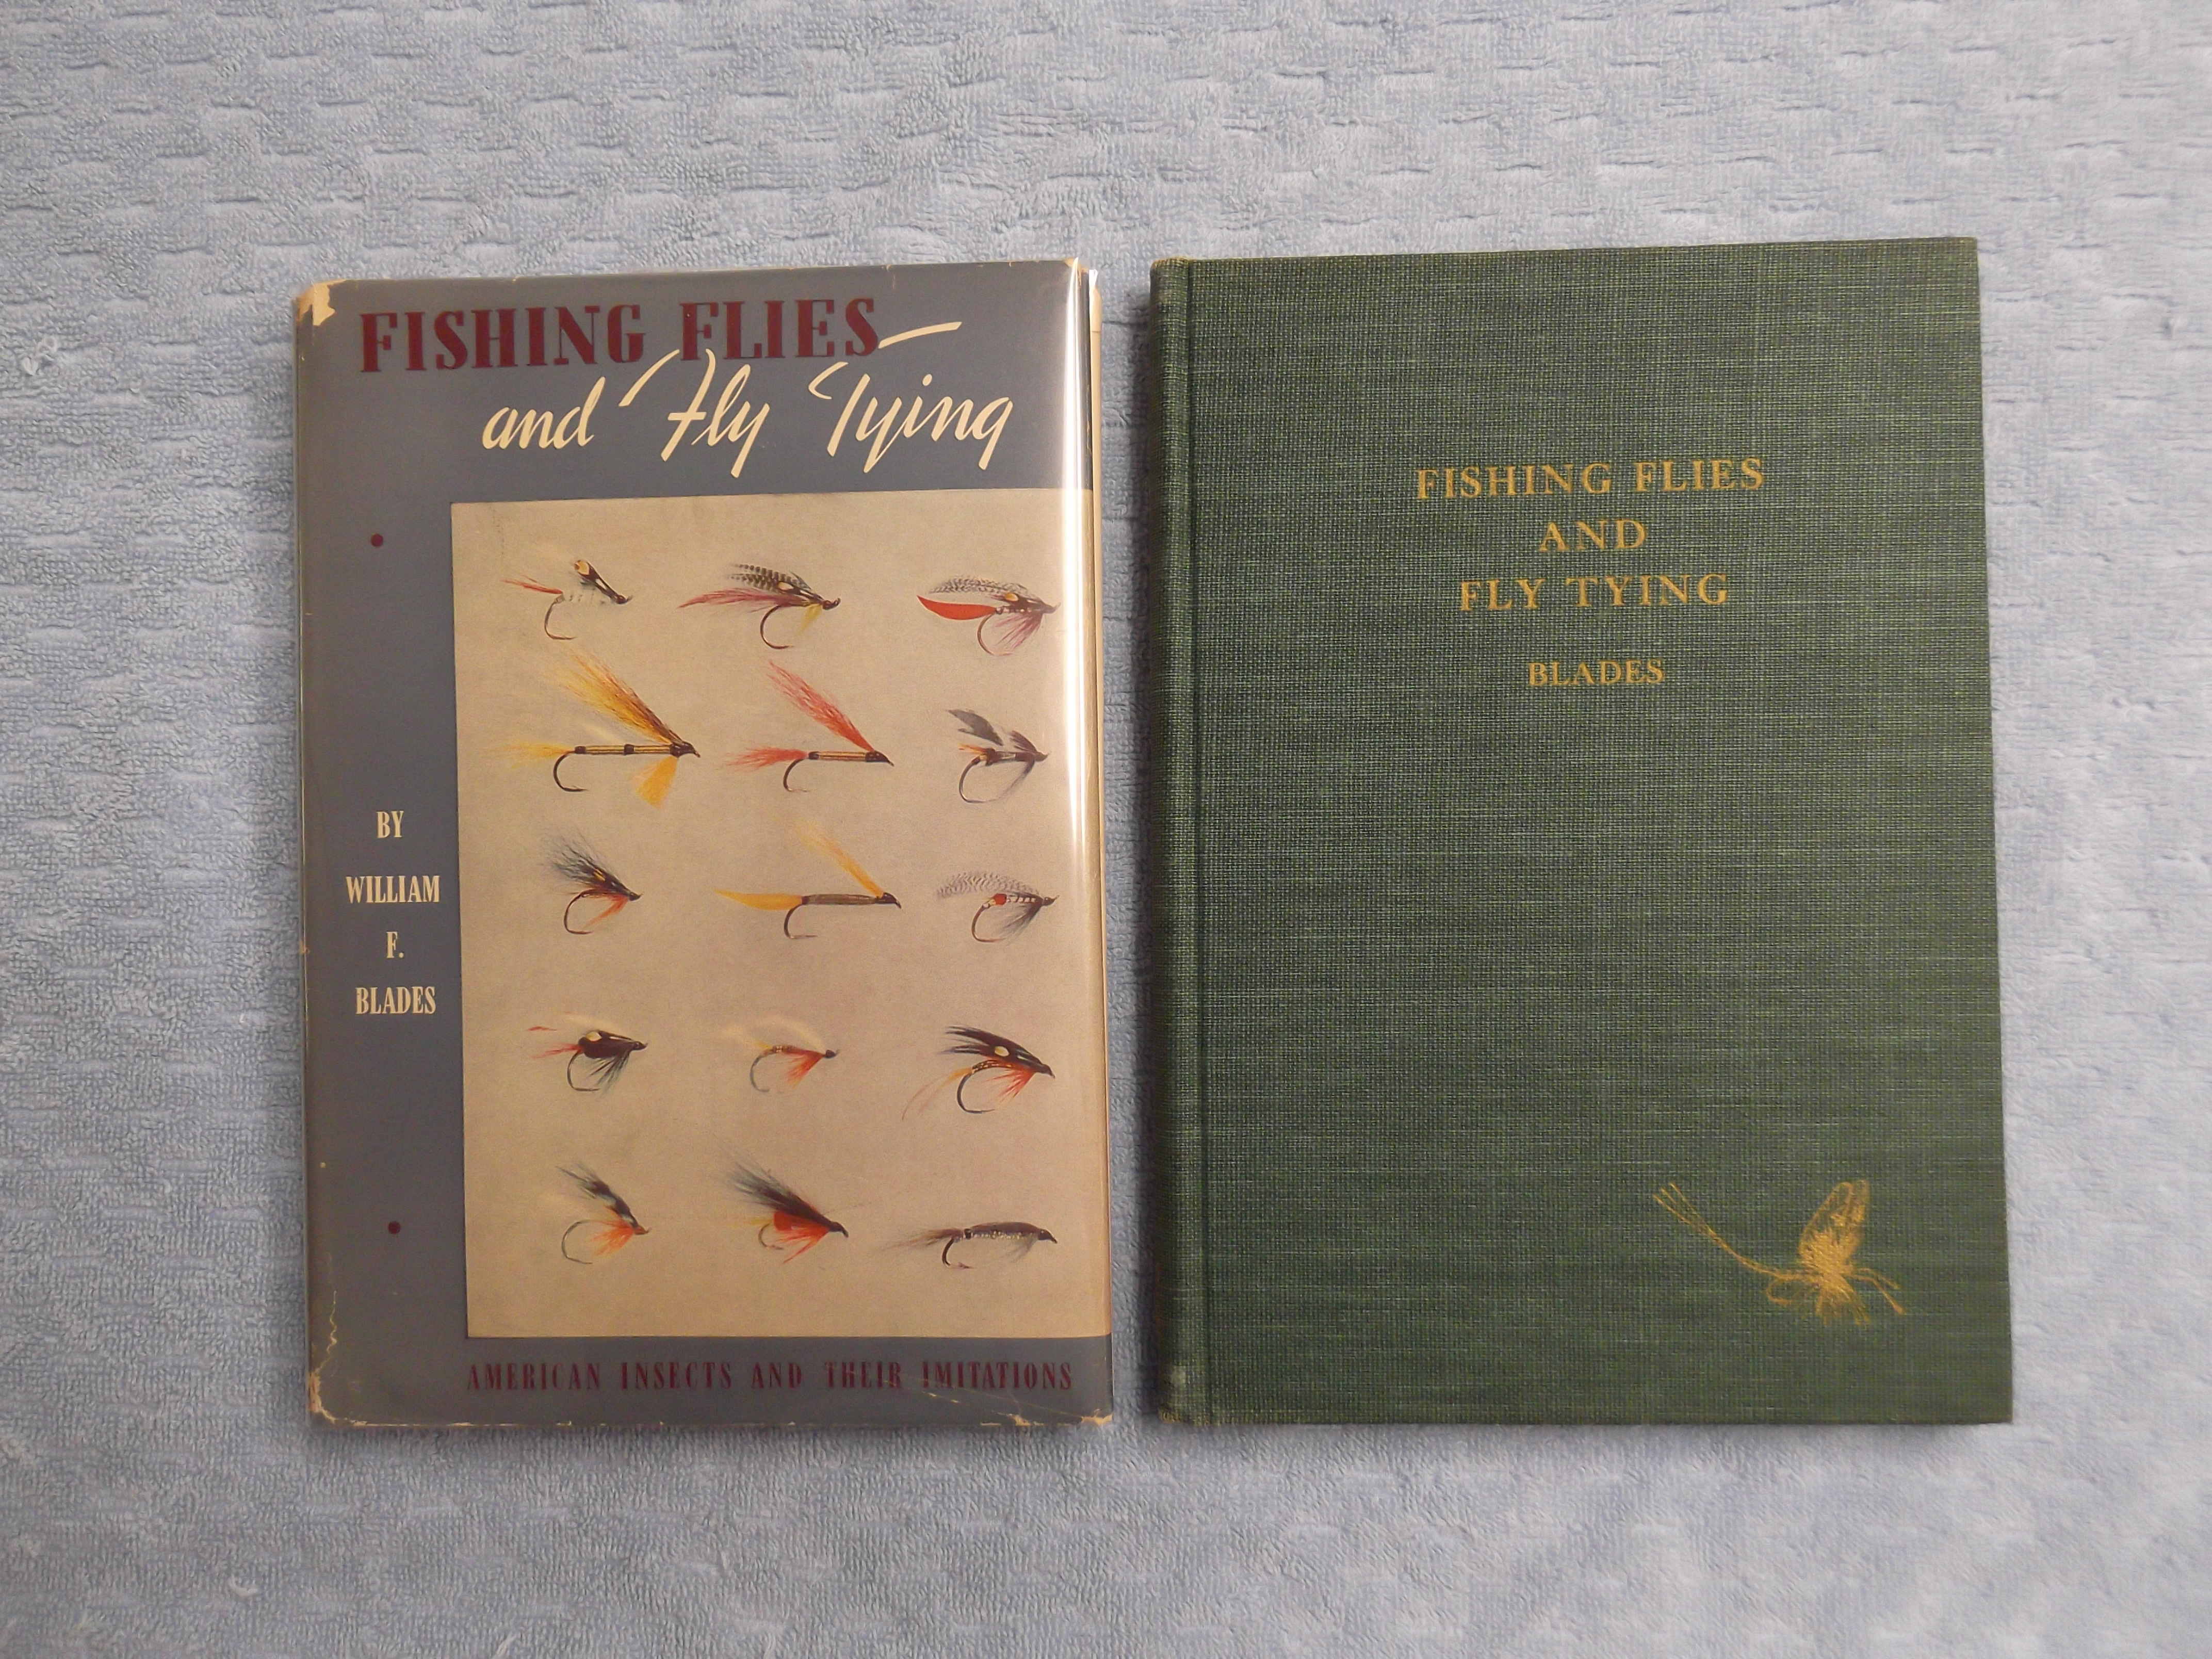 Fishing Flies and Fly Tying. American Insects and Their Imitations